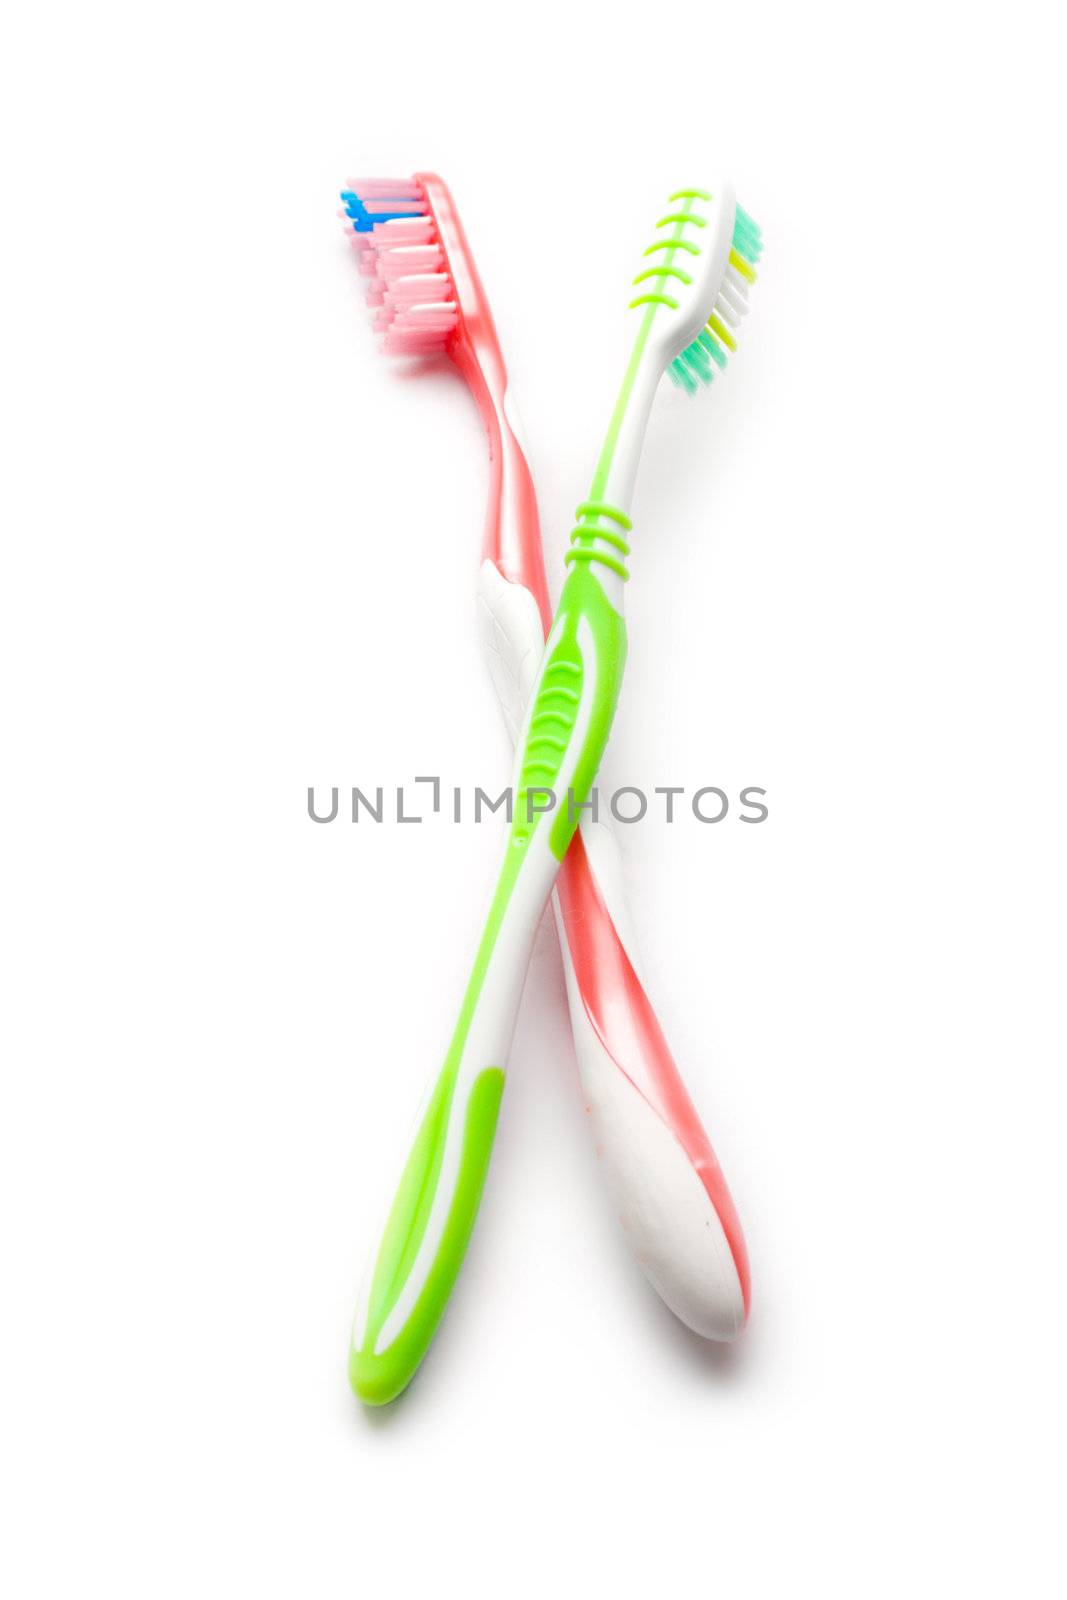 Toothbrushes isolated on white by Garsya